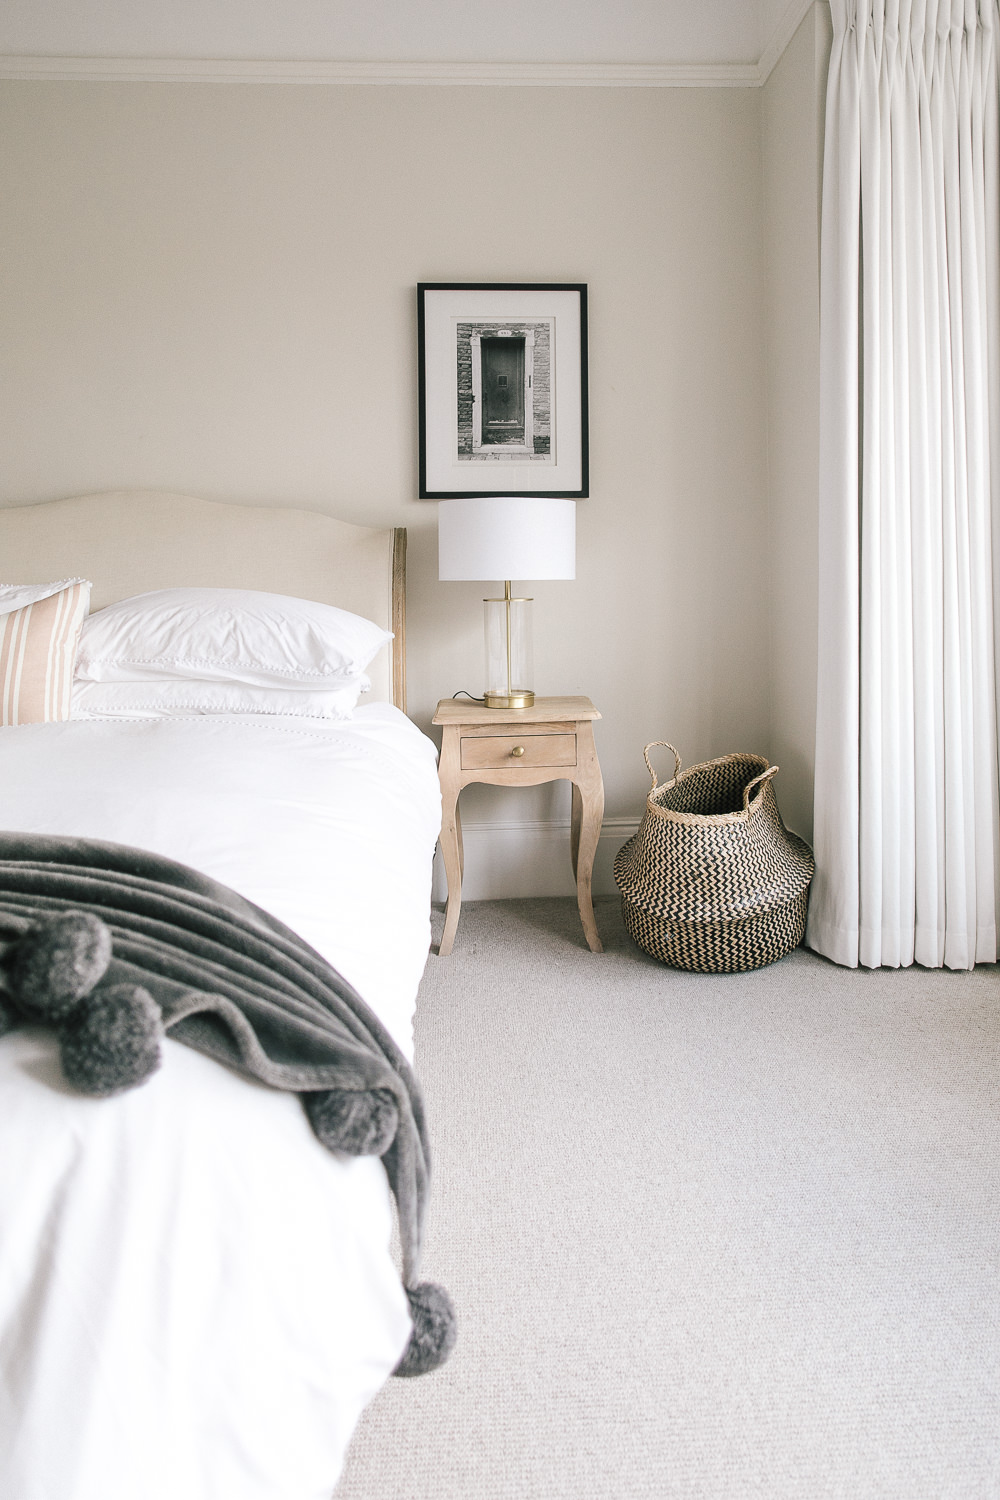 Coco bed from Loaf, Ikea belly basket and Avignon bed linen from The White Company